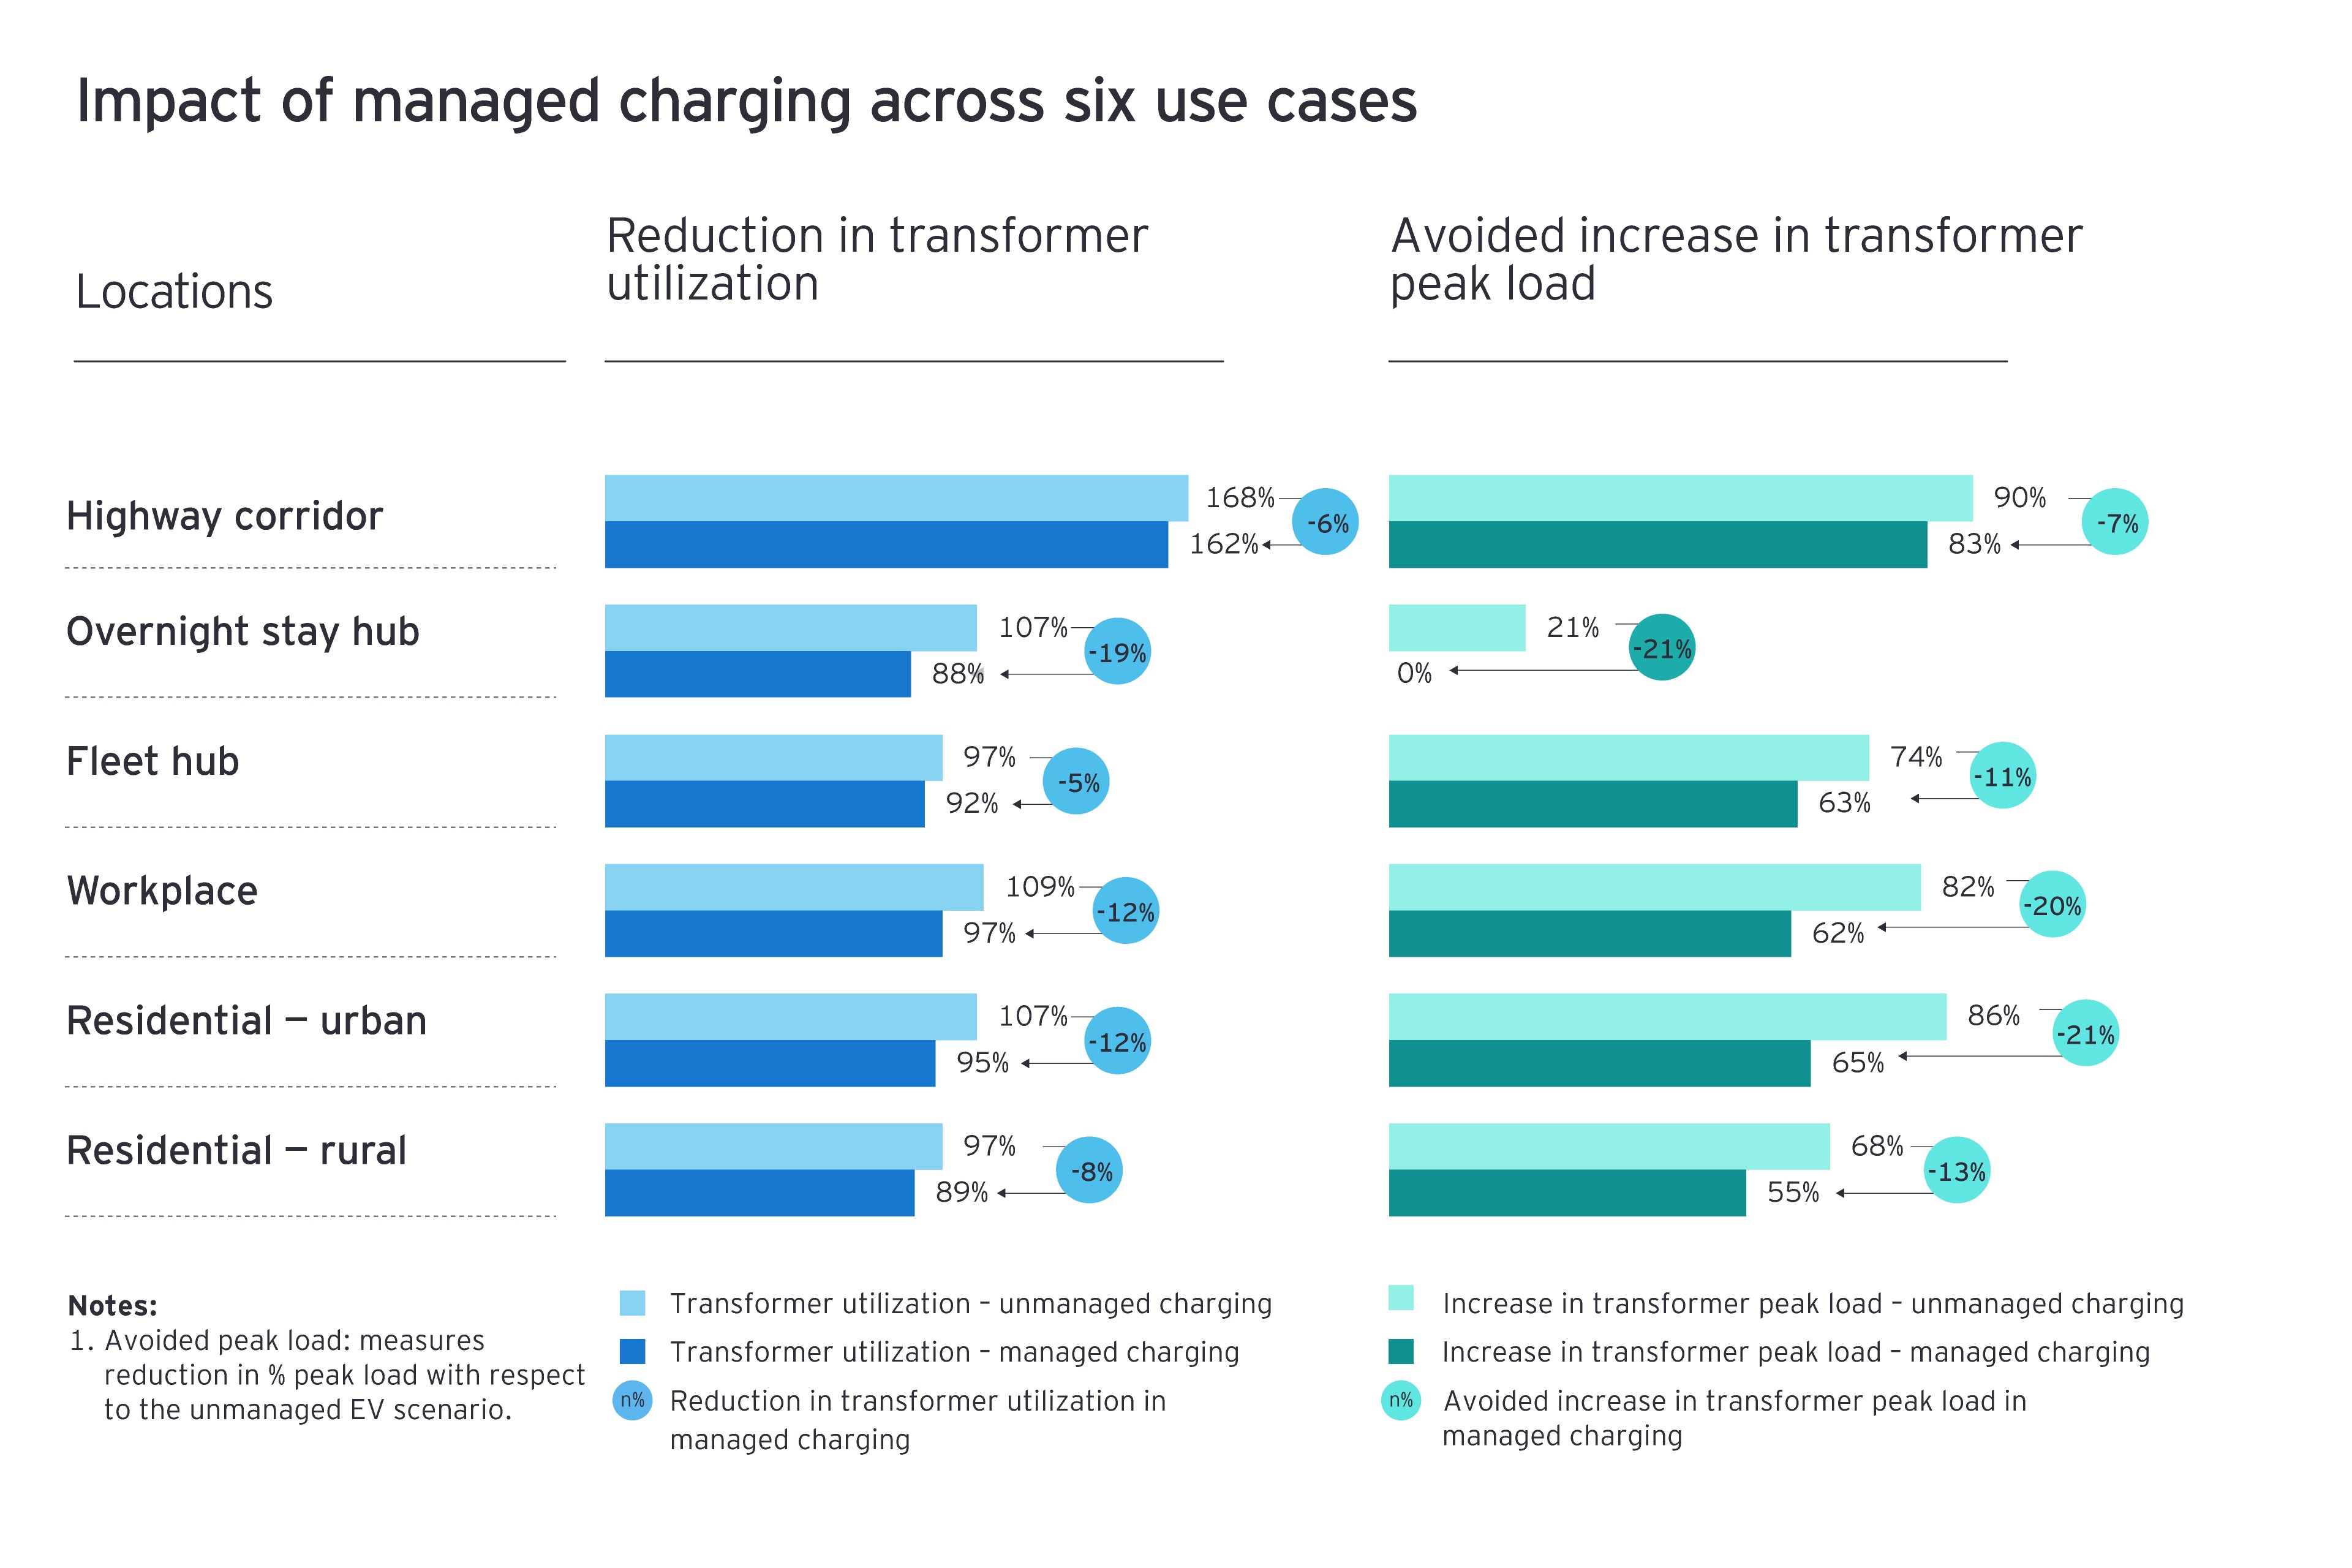 Figure 2: Impact of managed charging across six use cases image 